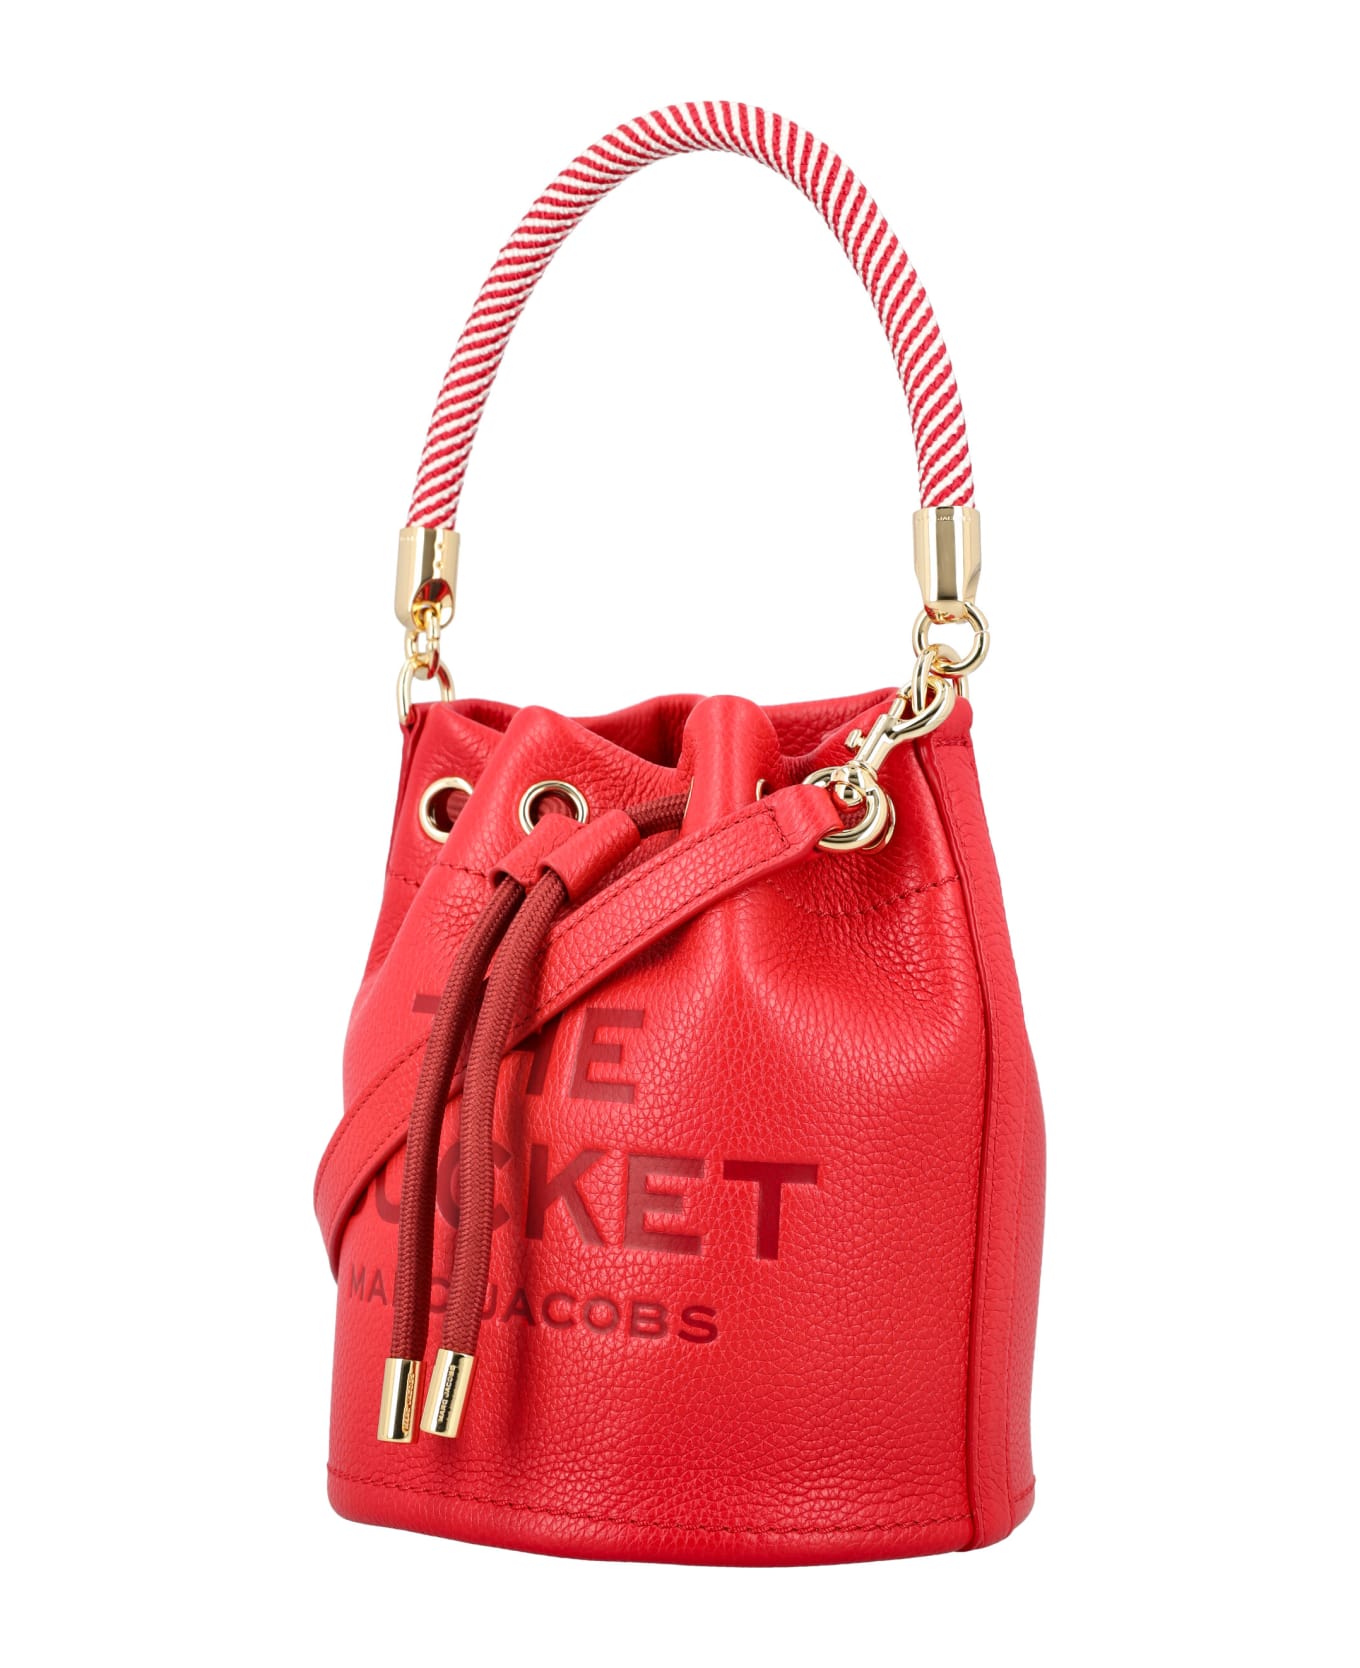 Marc Jacobs The Bucket Bag - TRUE RED